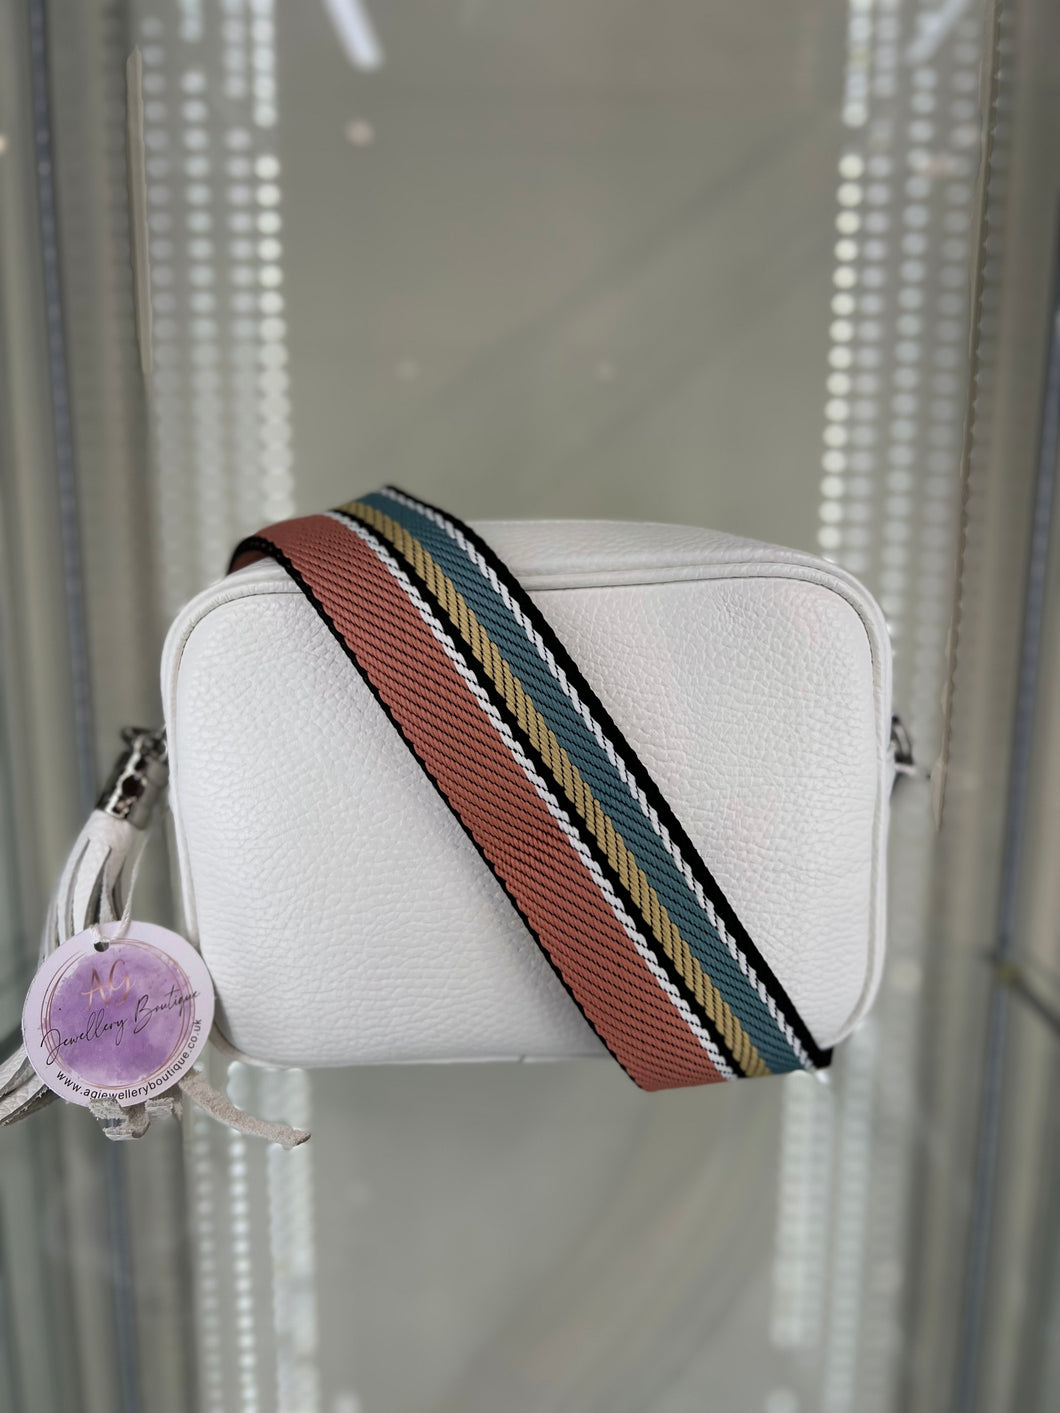 Real Leather White Bag with Coral/Blue striped strap